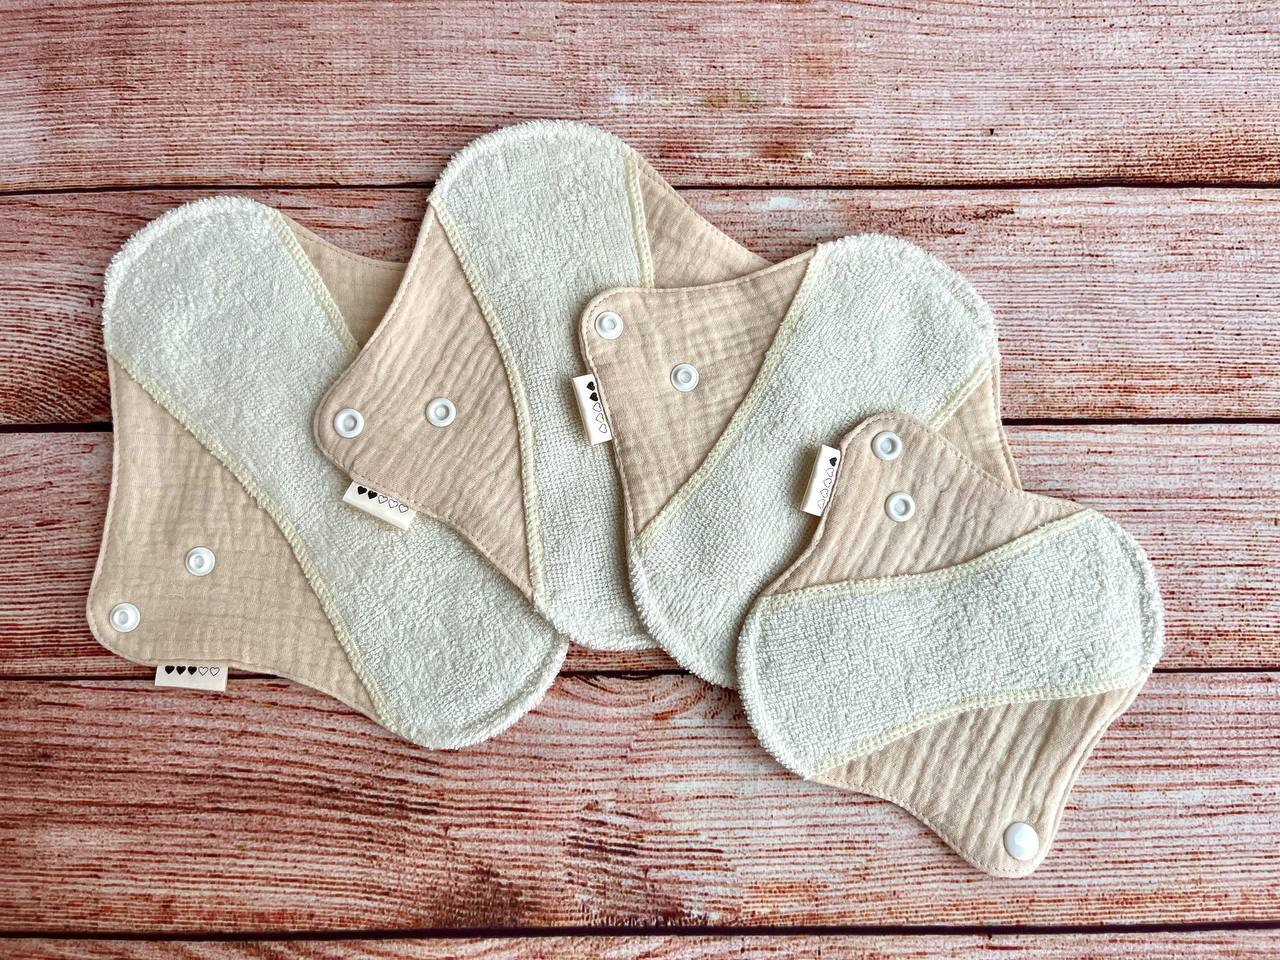 Reusable Thong Panty Liners for Daily Use, 6 Organic Cotton Cloth